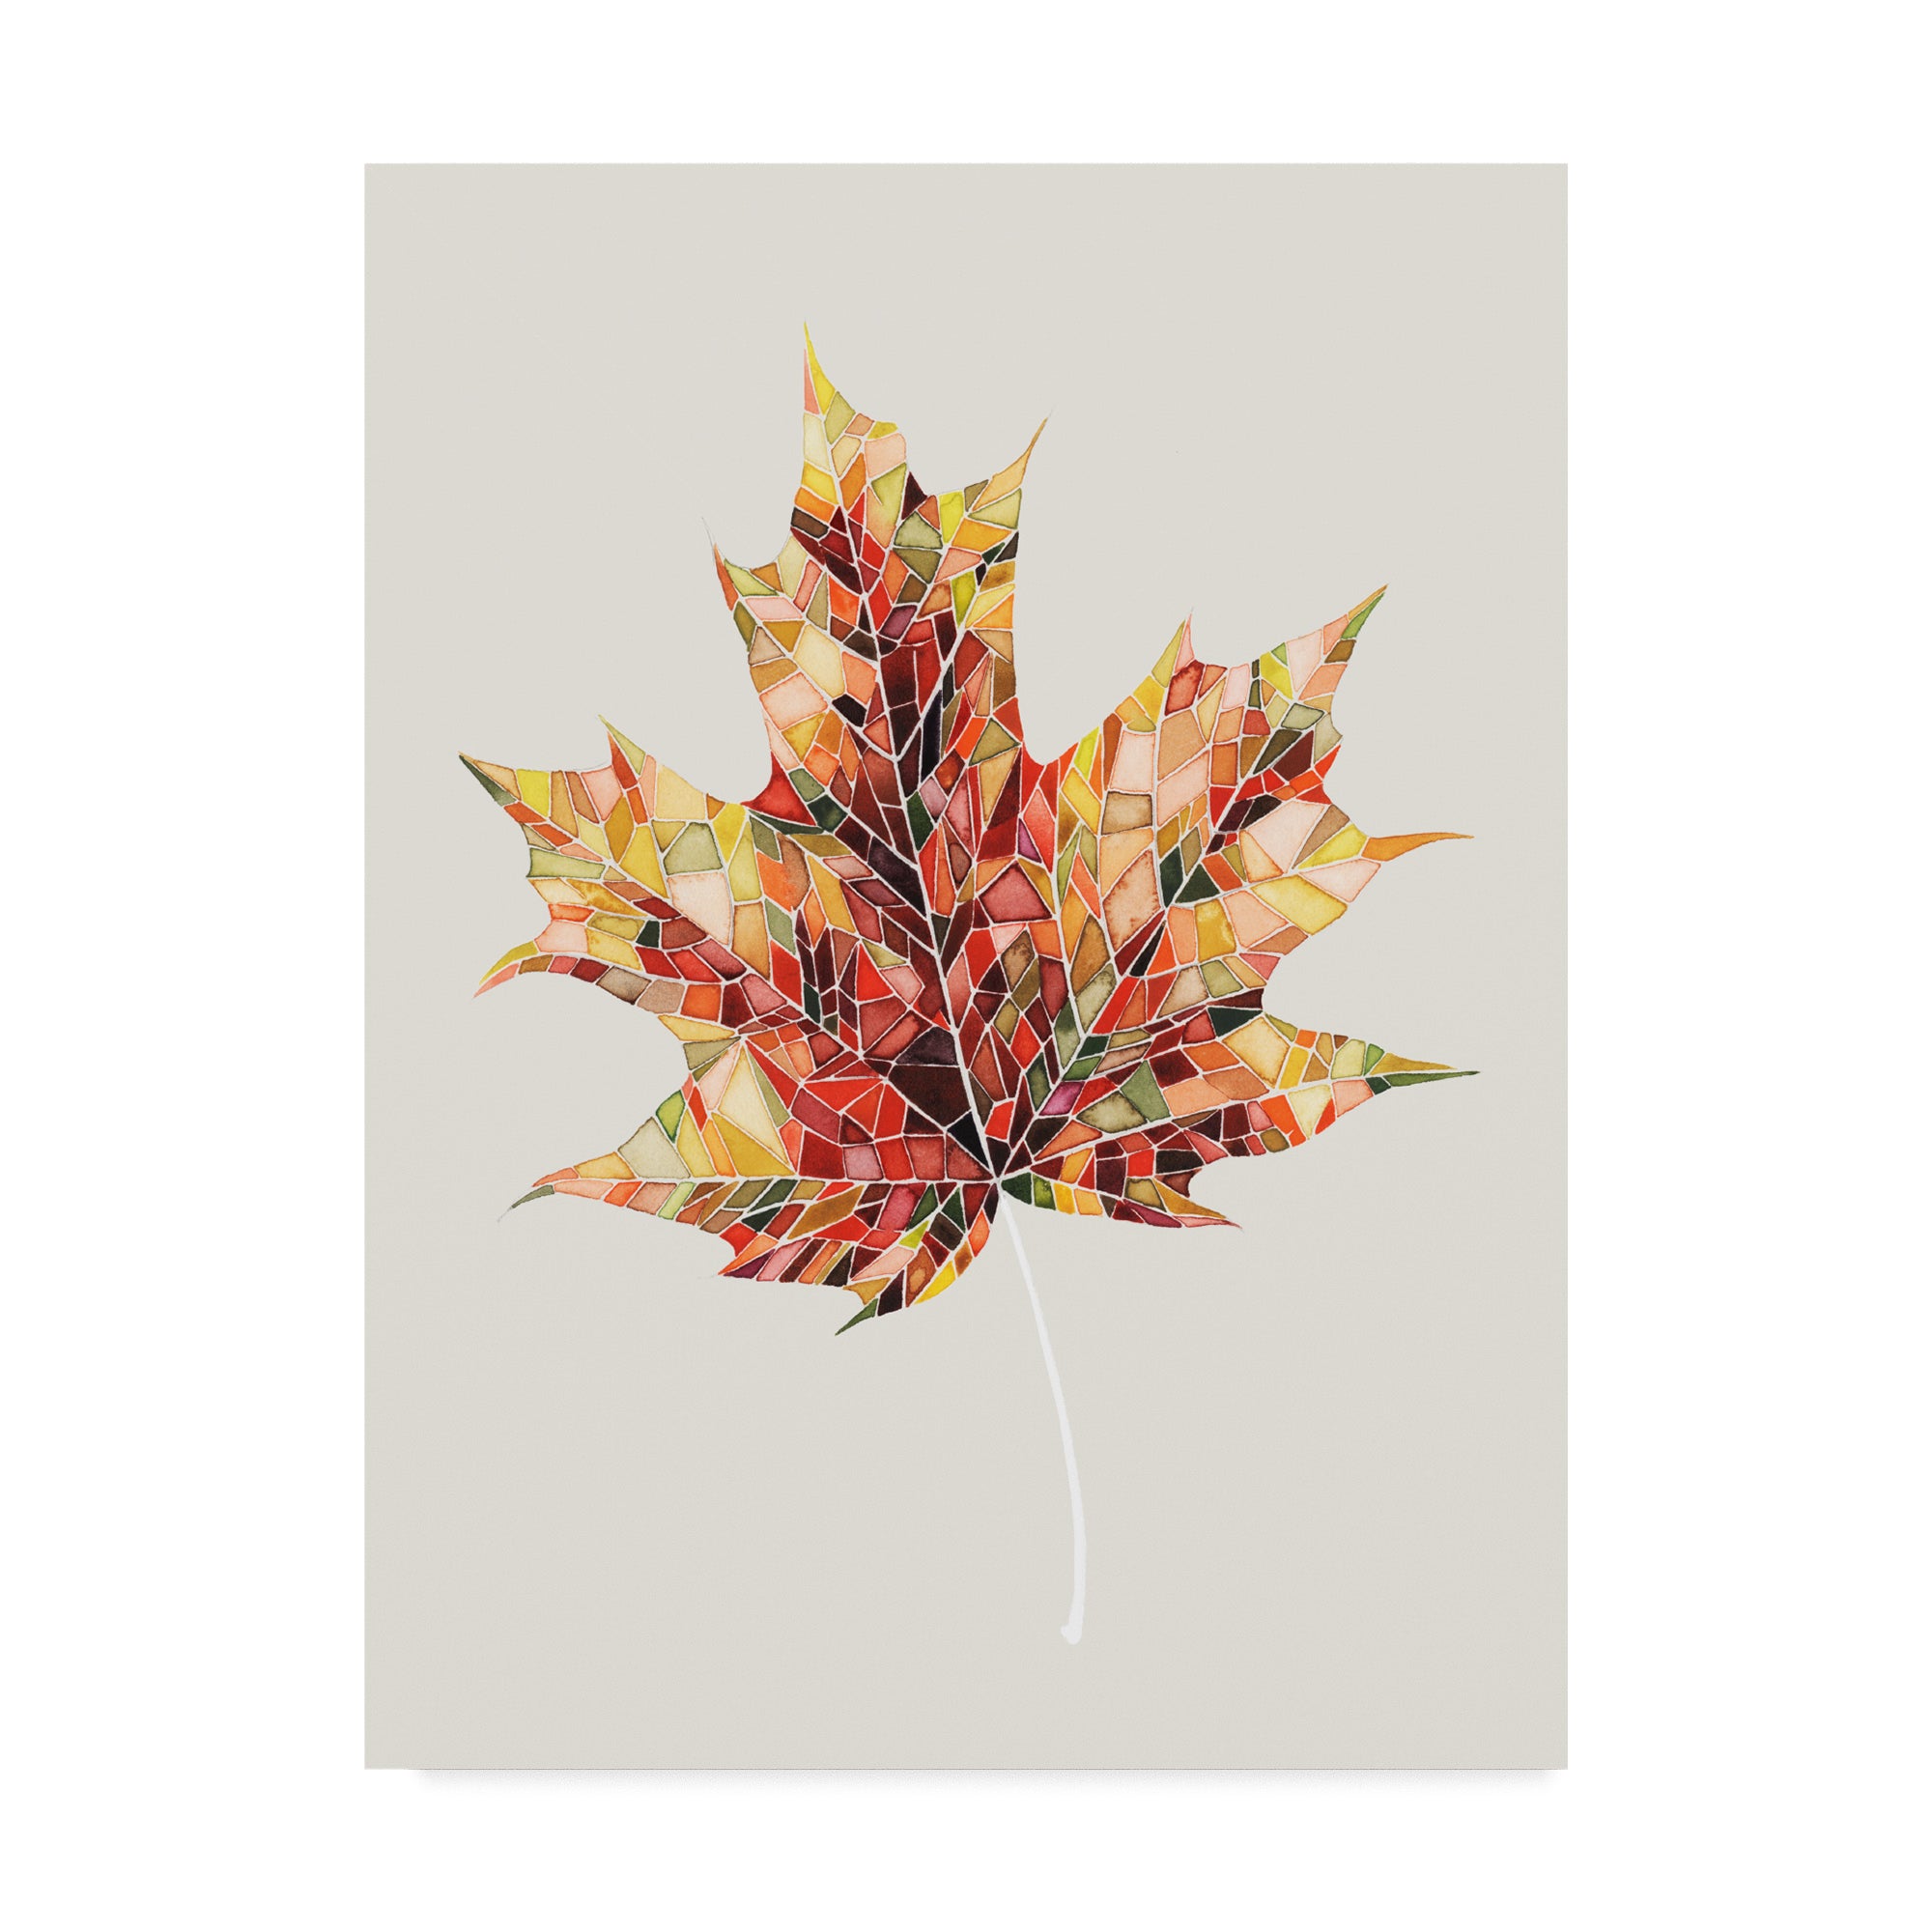 Get Festive With These Fall Accents For Your Home